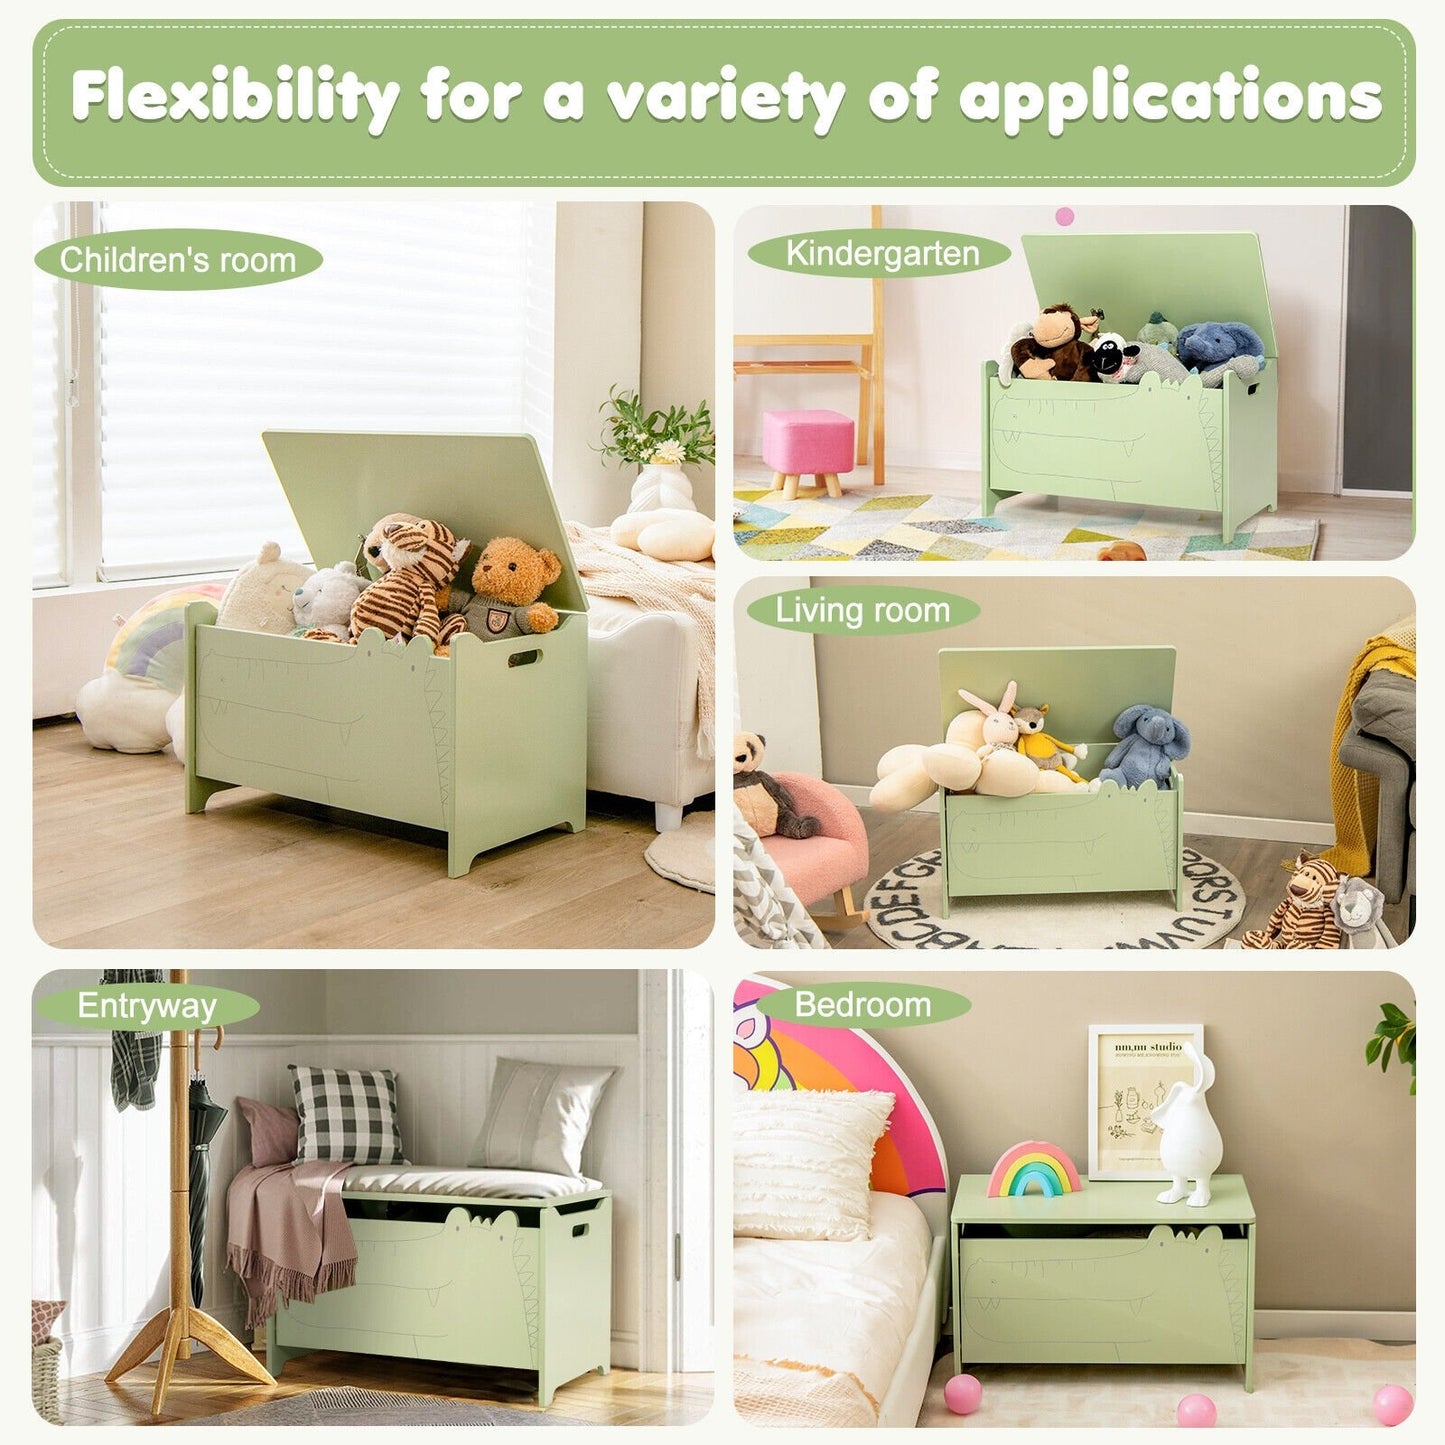 Wooden Kids Toy Box with Safety Hinge, Green